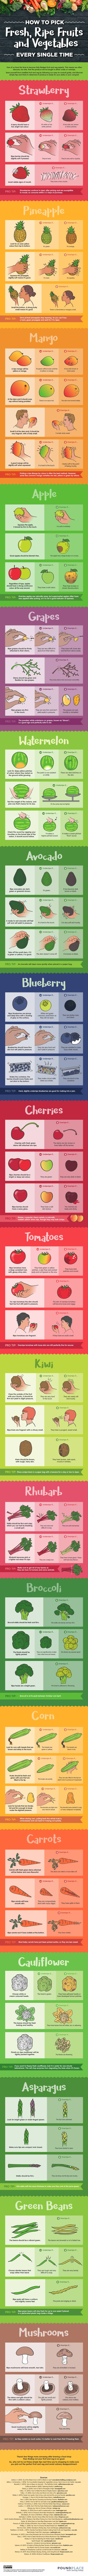 How-to-pick-fresh-ripe-fruits-and-vegetables-every-single-time-UK